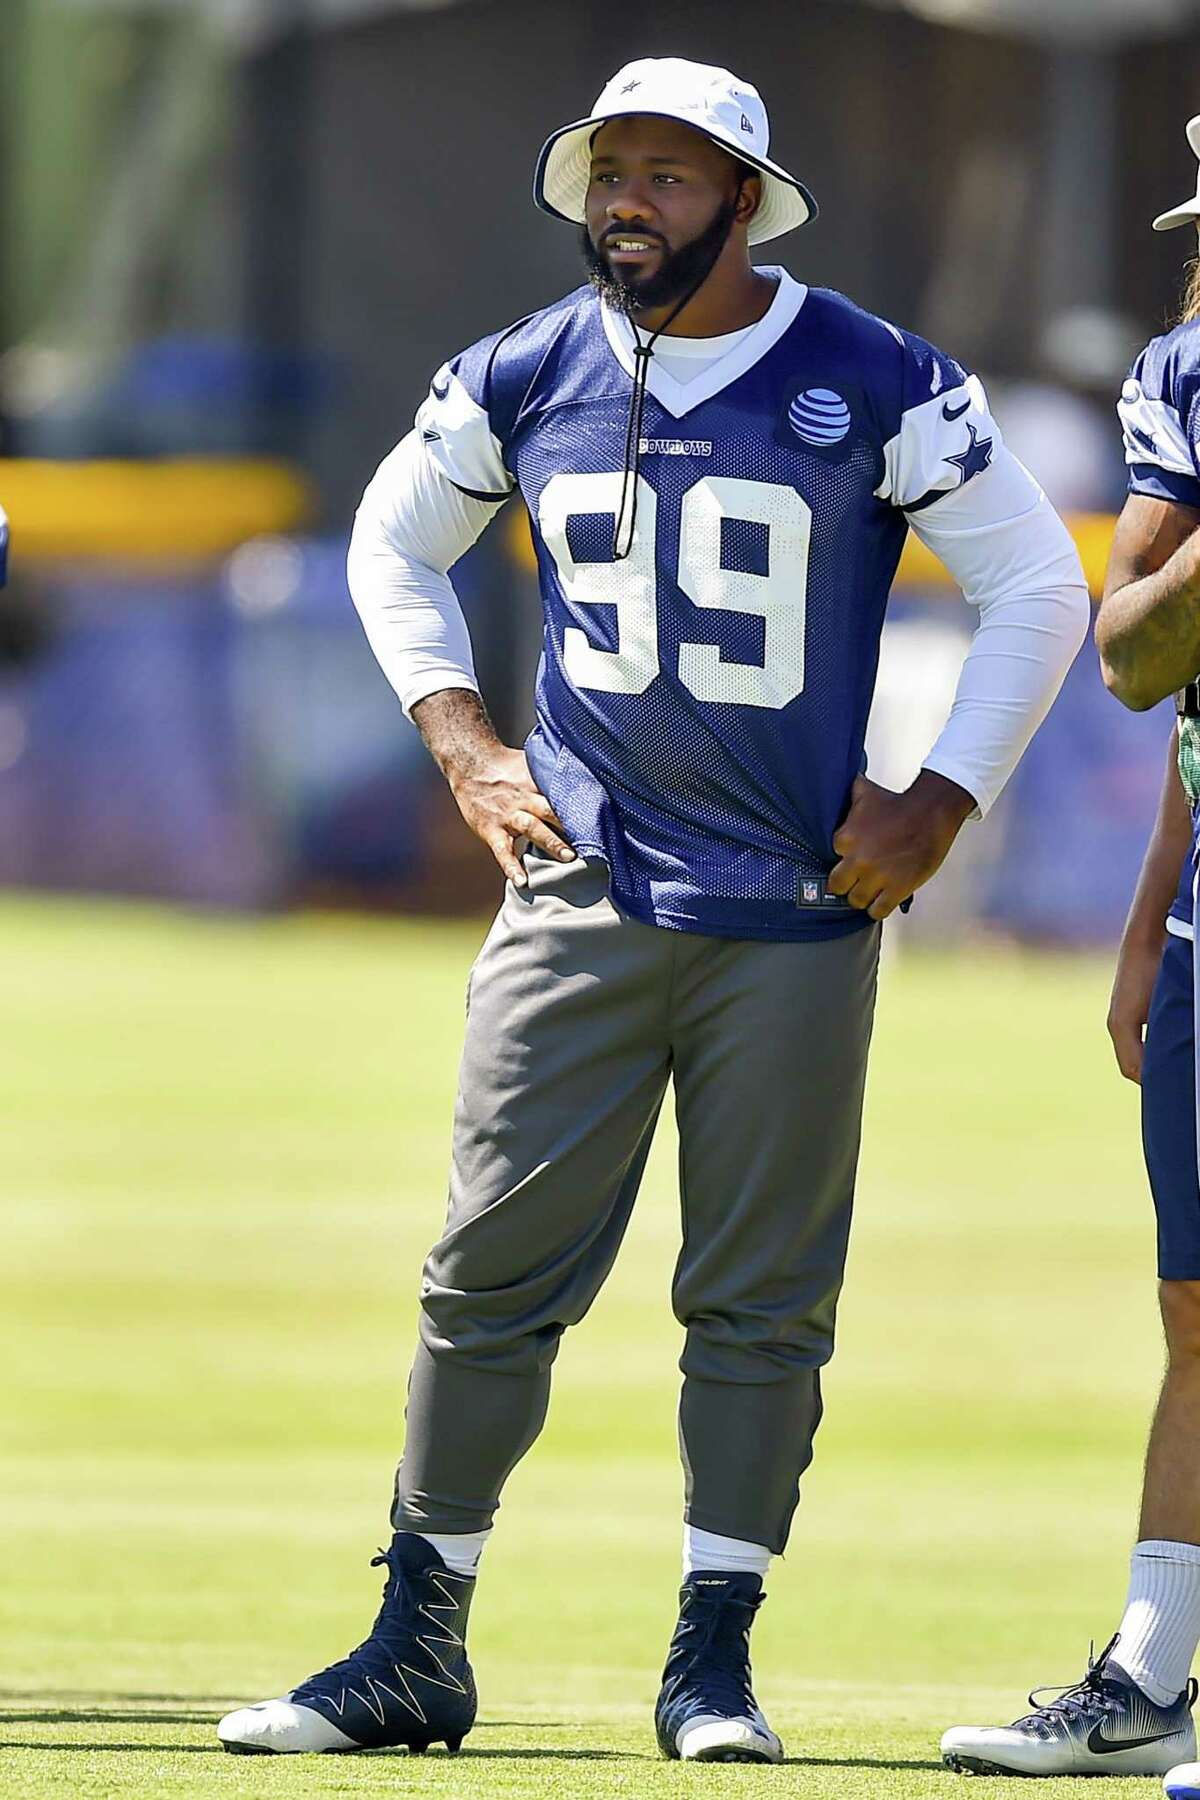 A source close to the situation told LMT on Thursday that the Cowboys player who joined the Laredo Swarm’s ownership group and saved the team’s 2017-18 season is second-year defensive end Charles Tapper. The 24 year old is a former fourth-round selection in the 2016 NFL Draft out of Oklahoma.